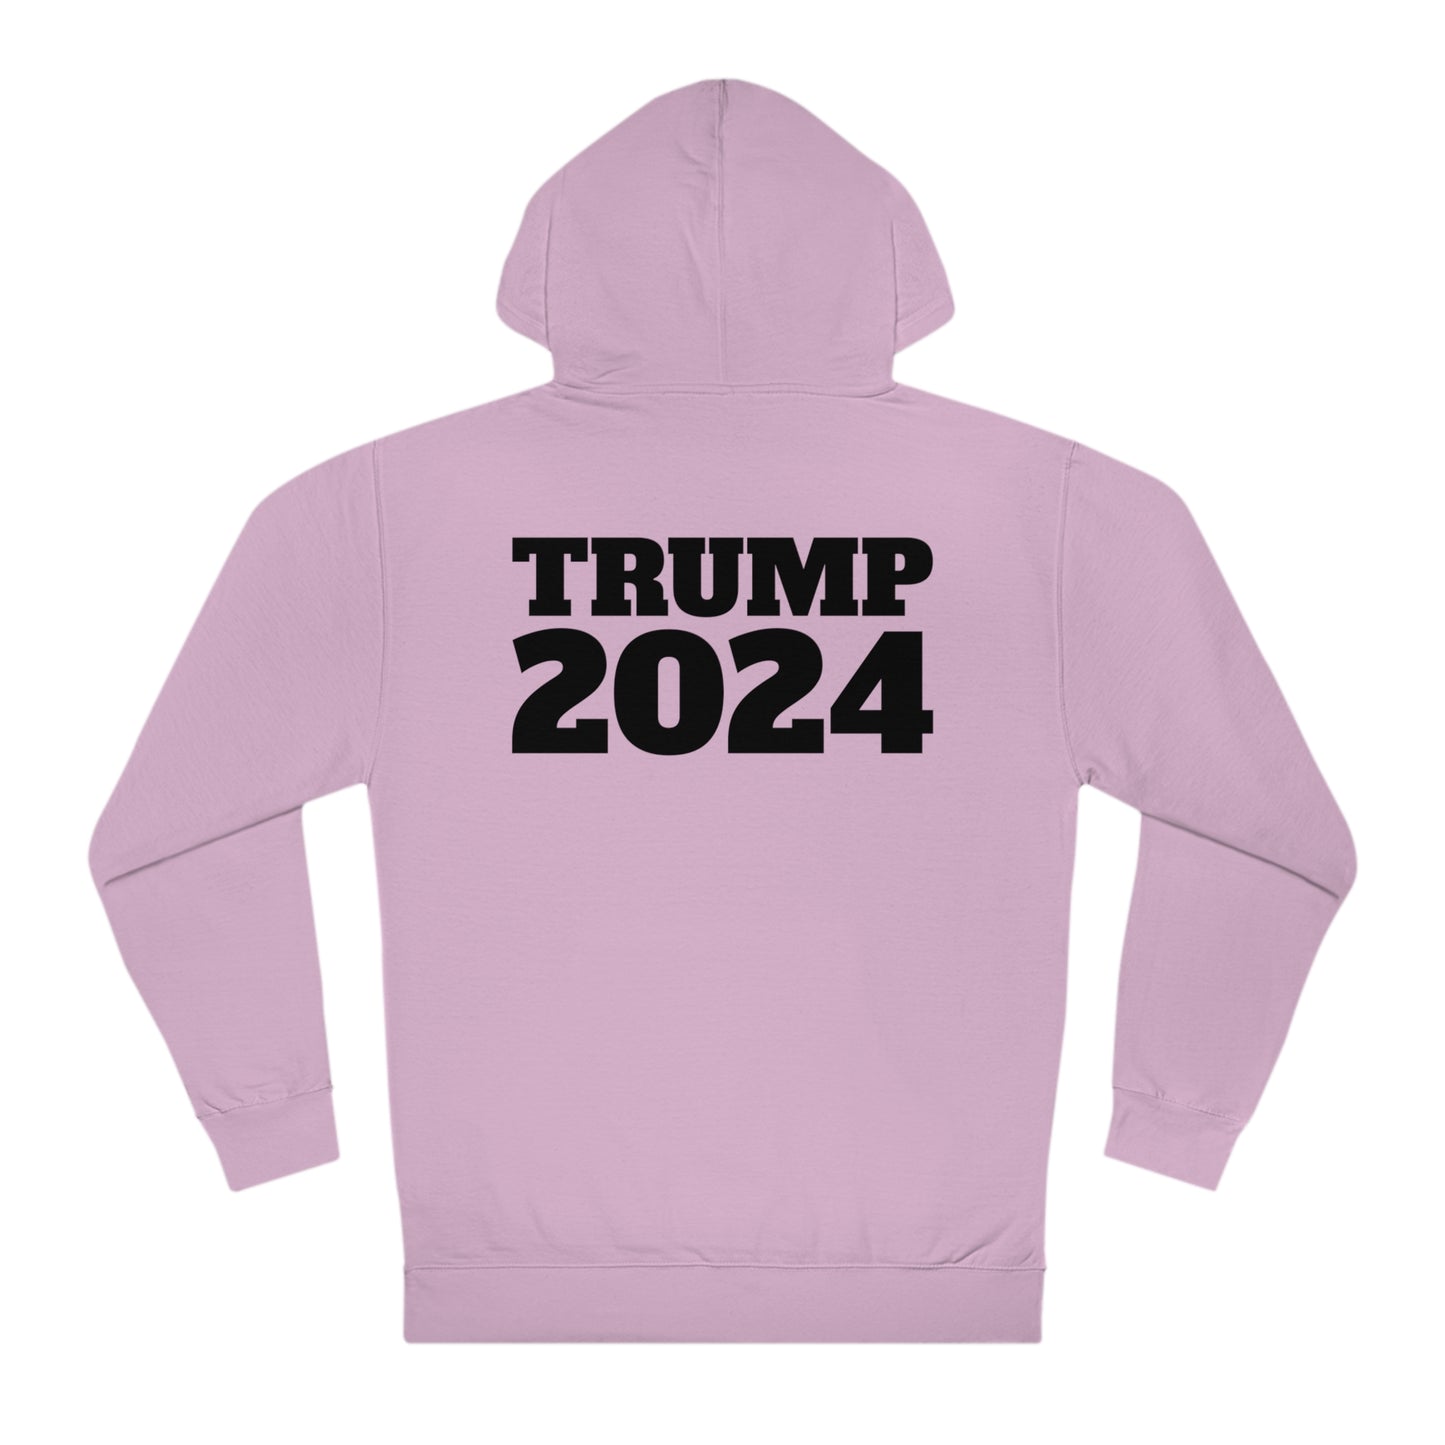 Trump Portrait 2024 soft and durable Unisex Hooded Sweatshirt Choose color and size